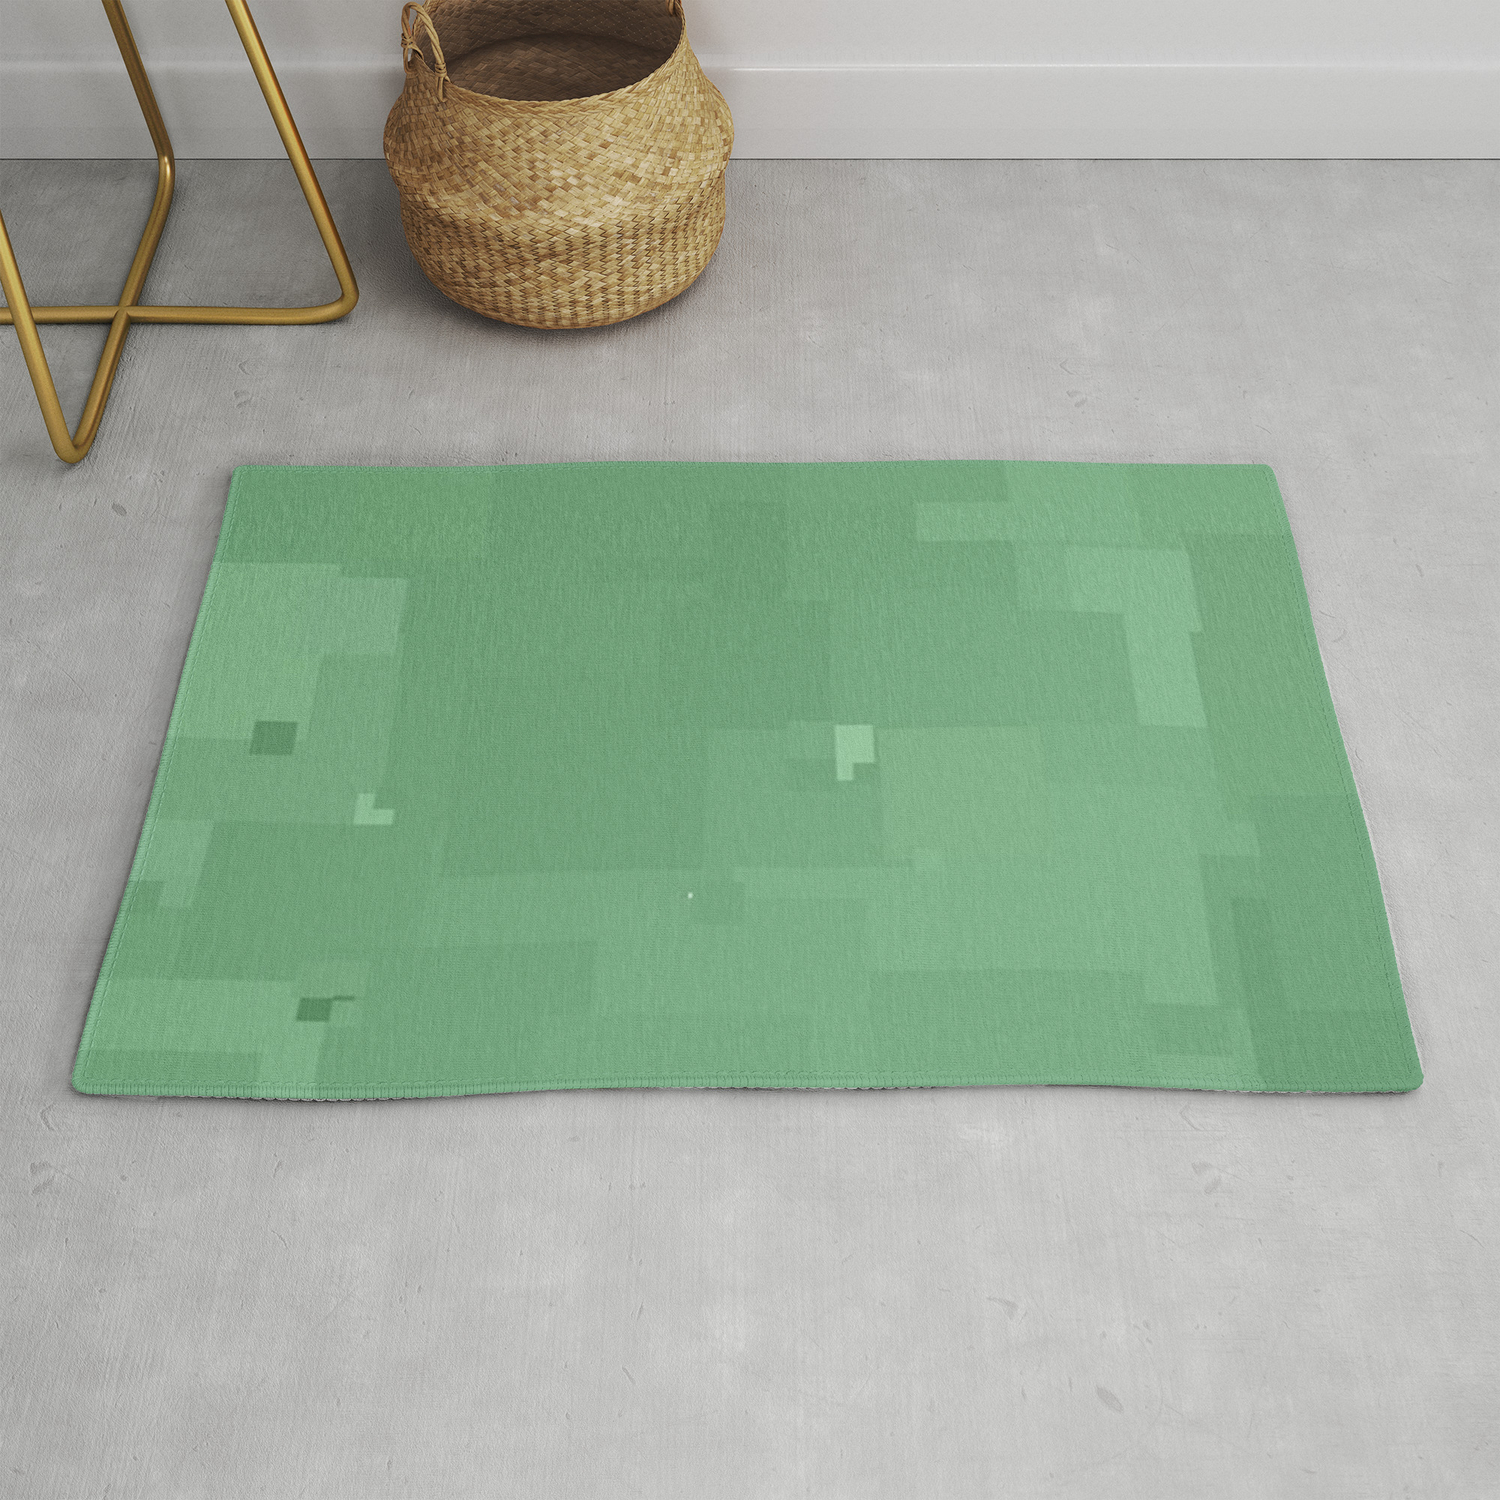 Impressive square accent rugs Hemlock Square Pixel Color Accent Rug By Saravalor Society6